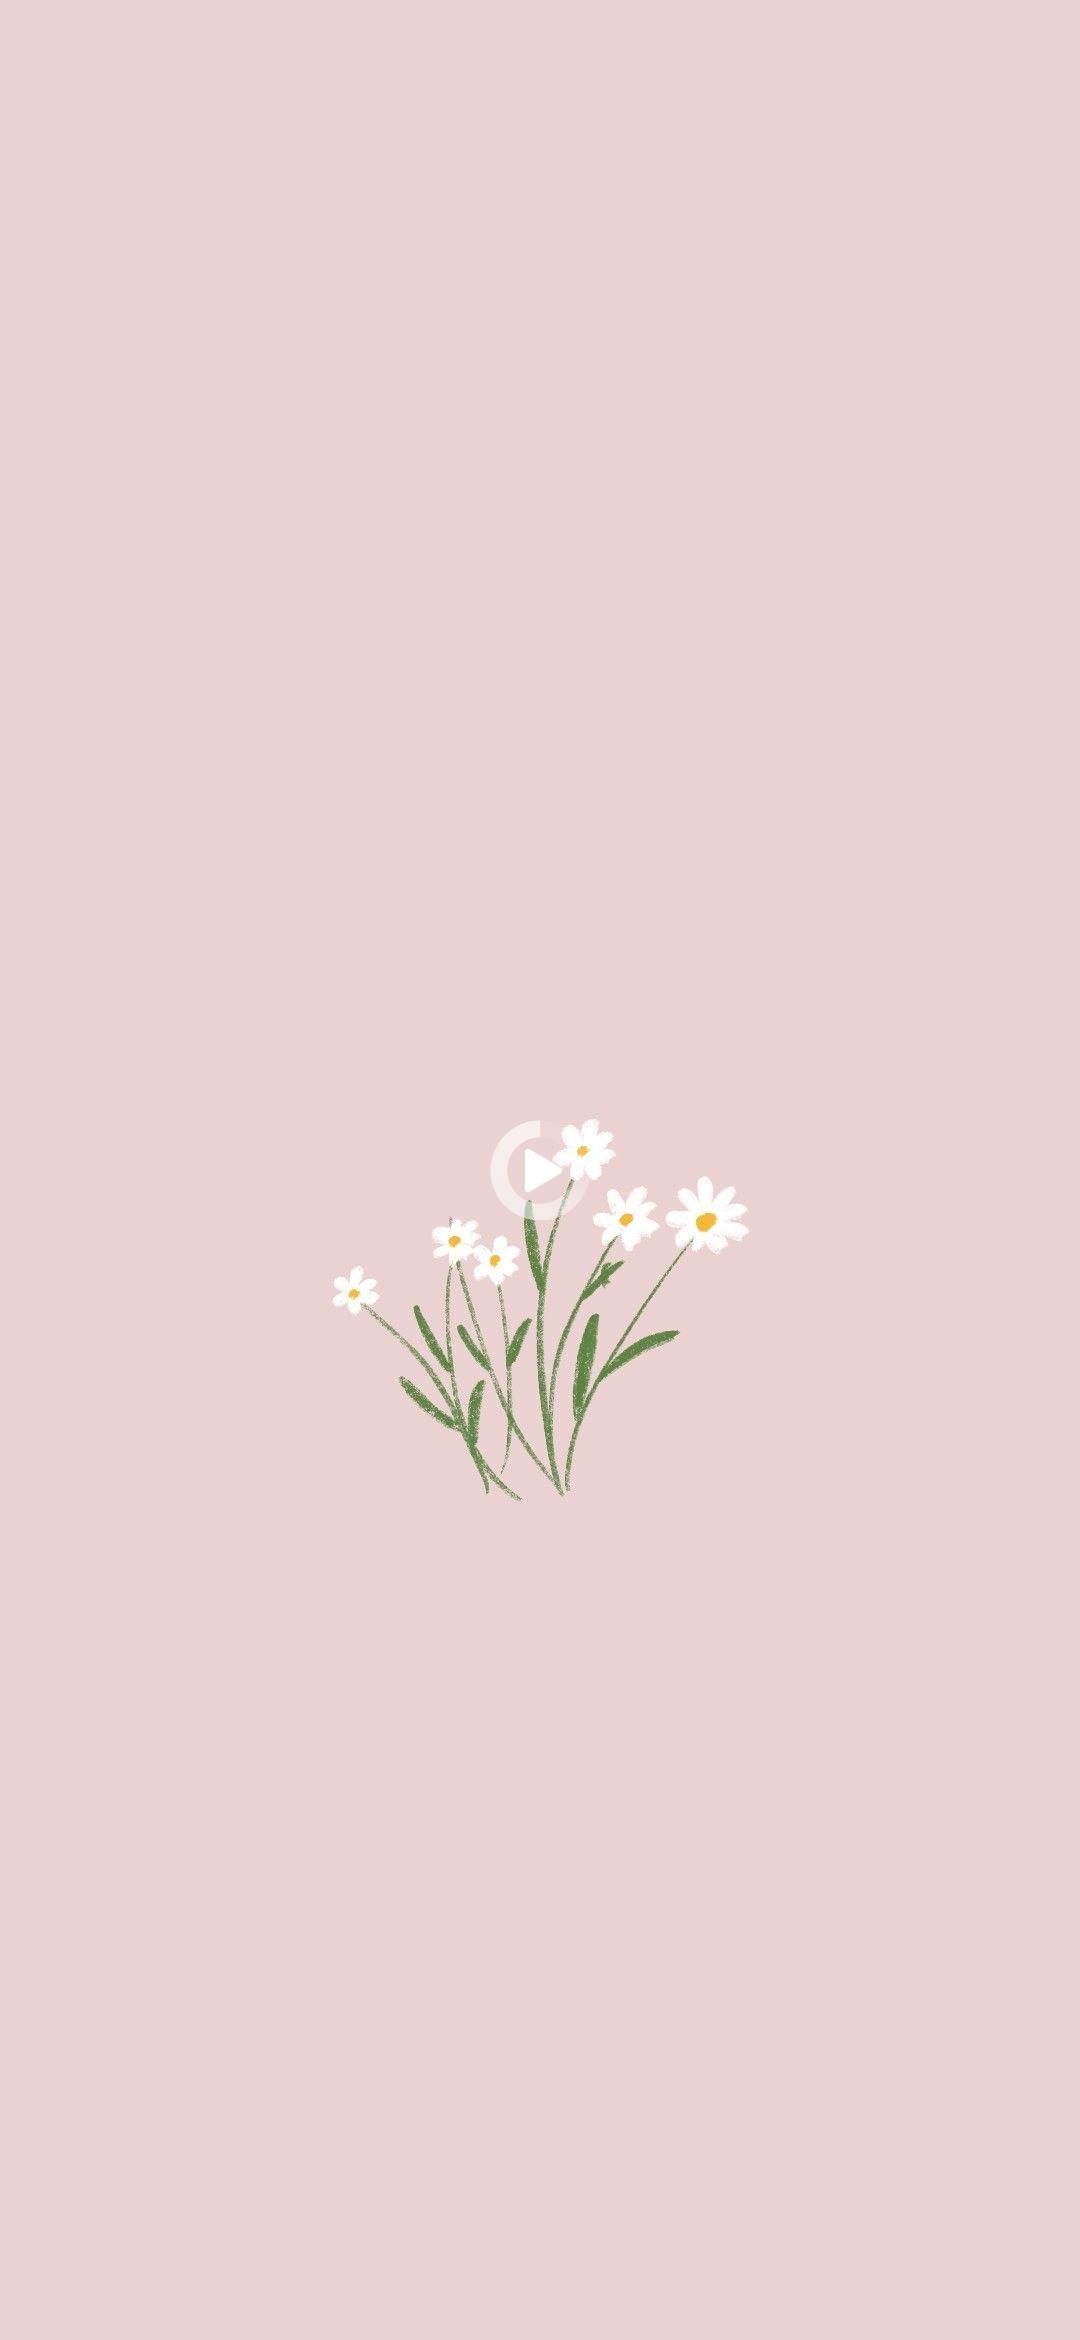 Aesthetic phone background with daisies and a moon - Phone, flower, plants, simple